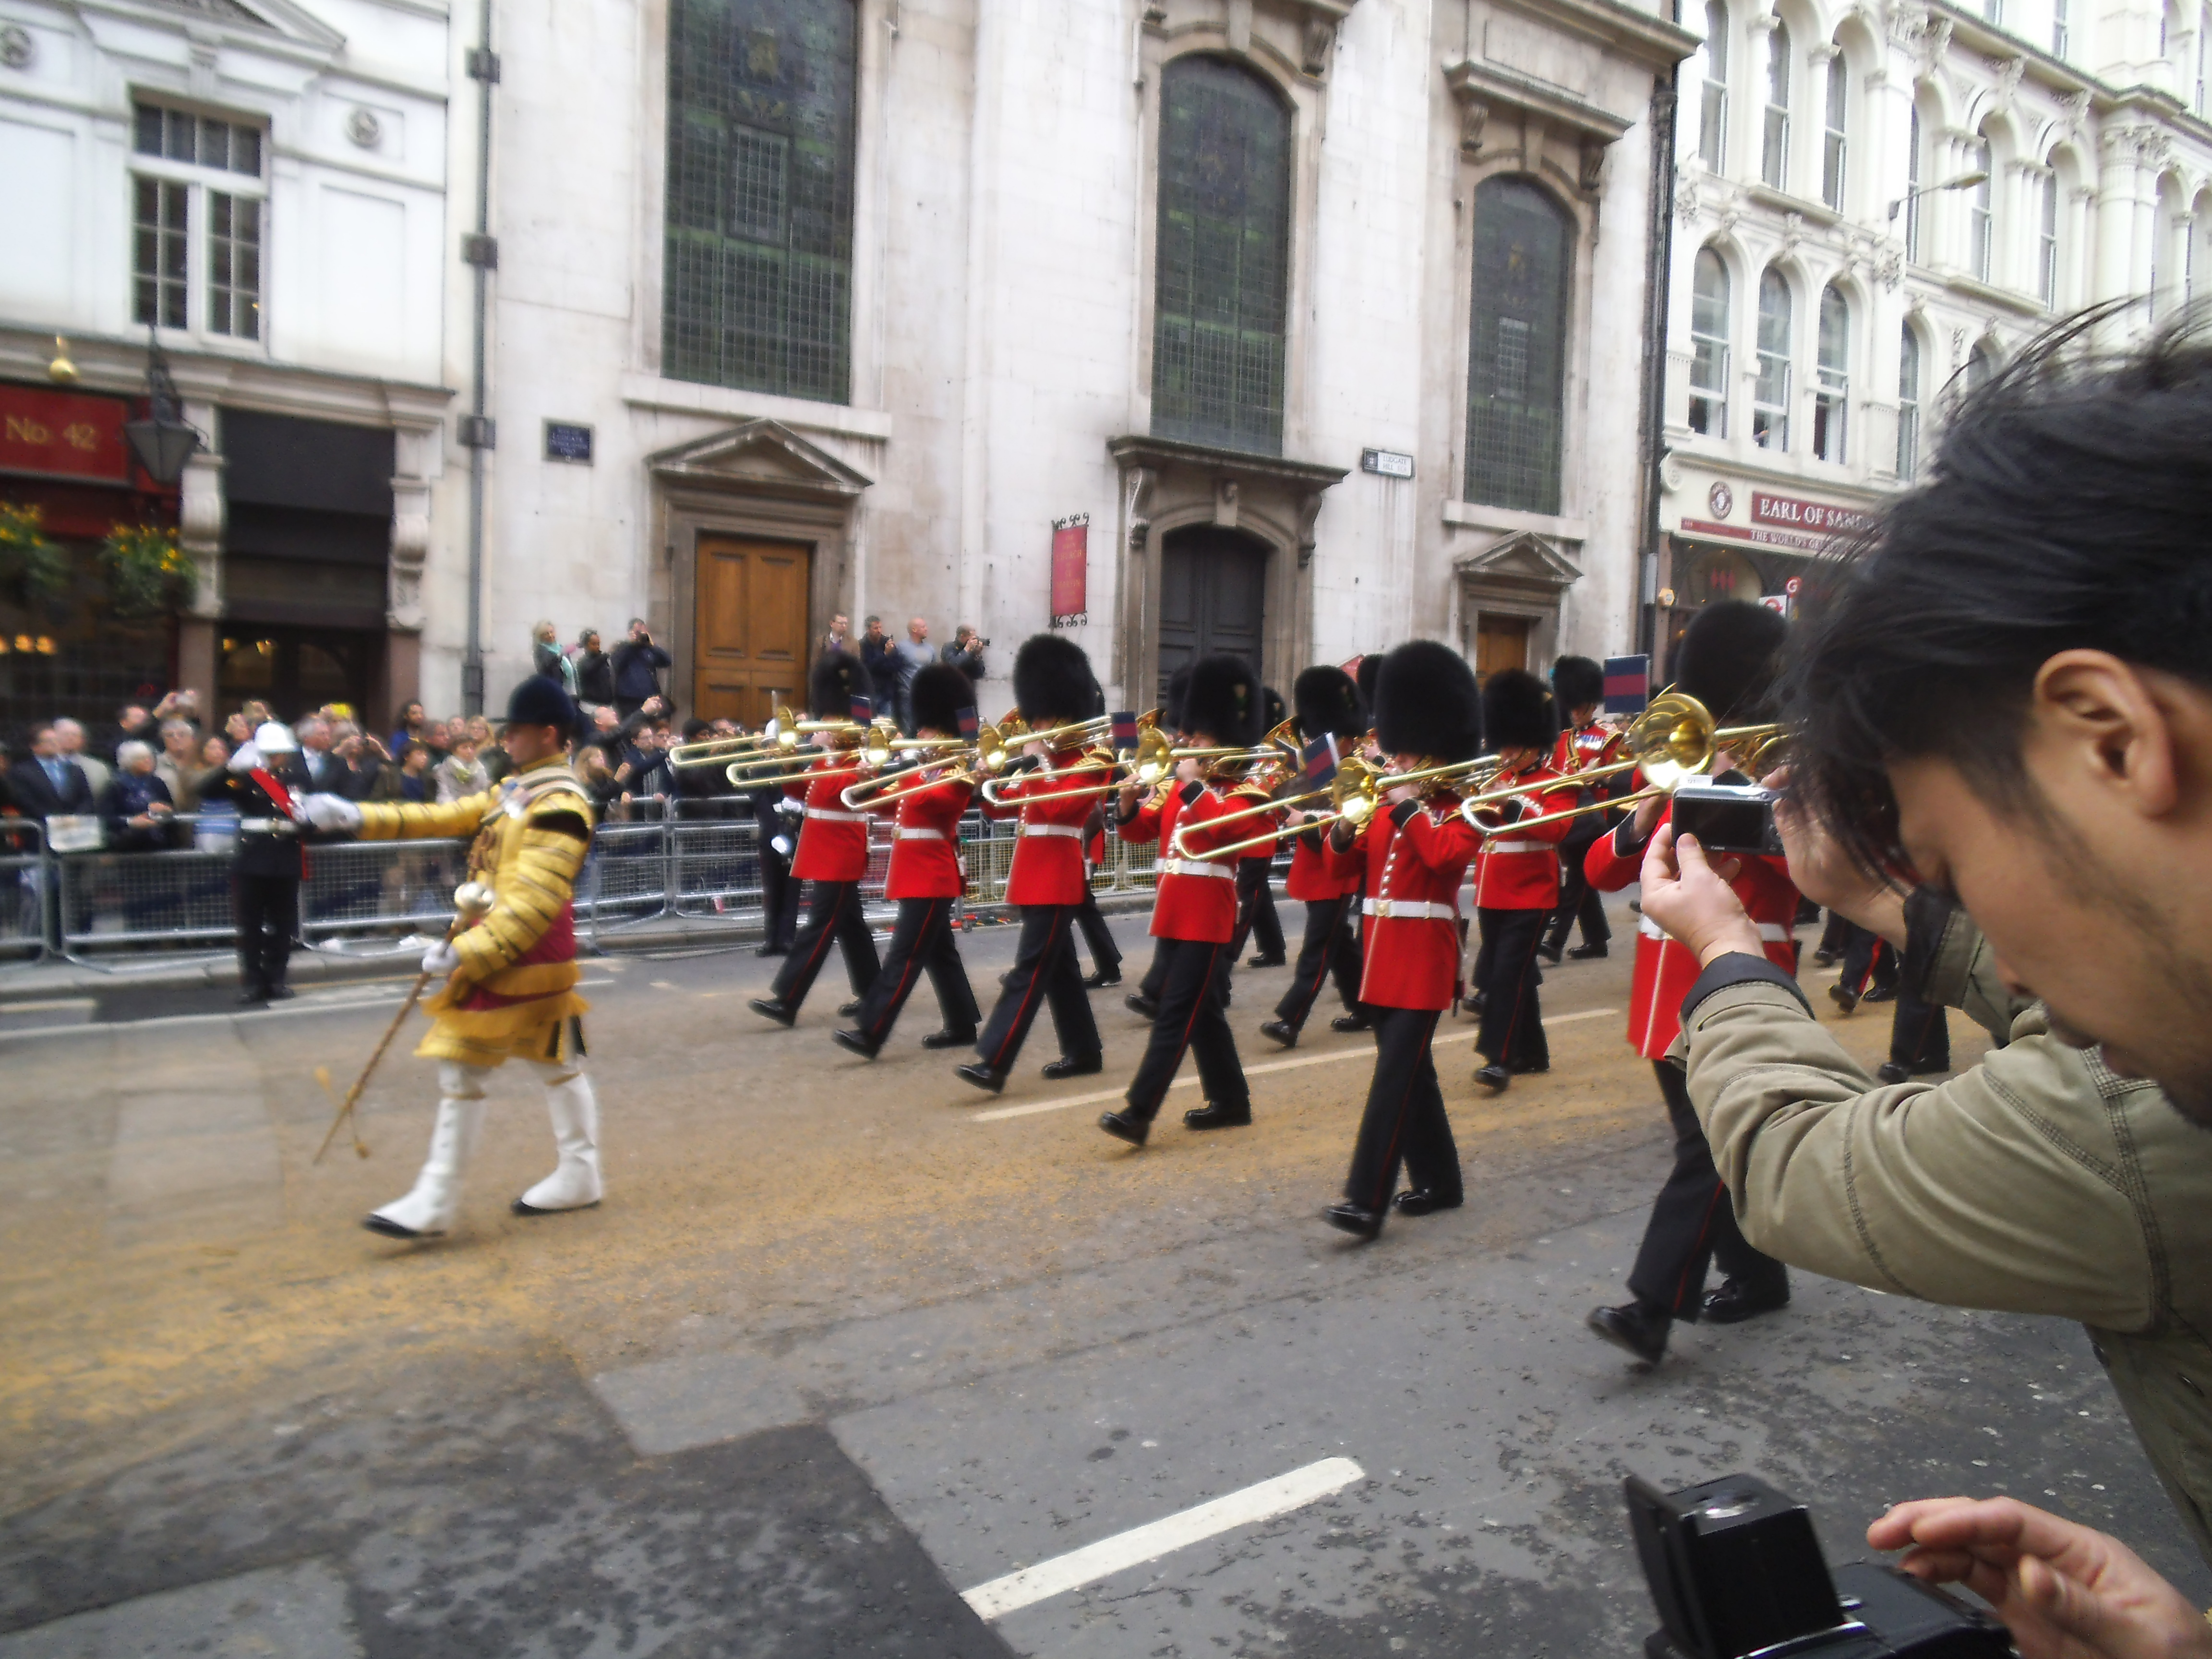 The band of the Welsh Guards